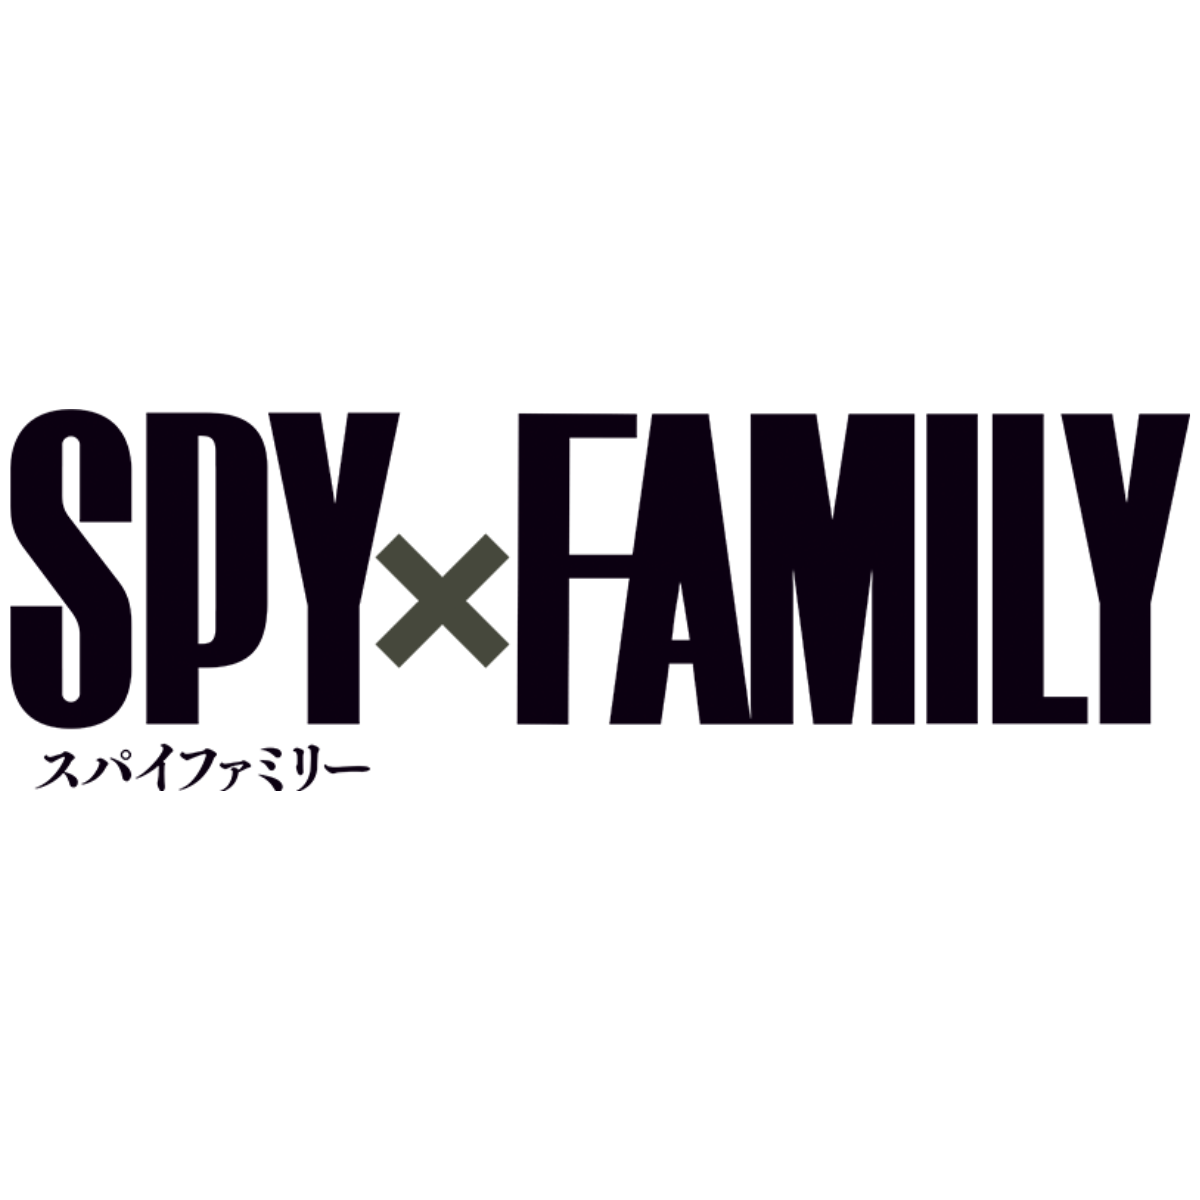 Movic x Spy x Family Chara Sleeve Collection Matte Series - [MT1515] &quot;Key Visual&quot;-Movic-Ace Cards &amp; Collectibles